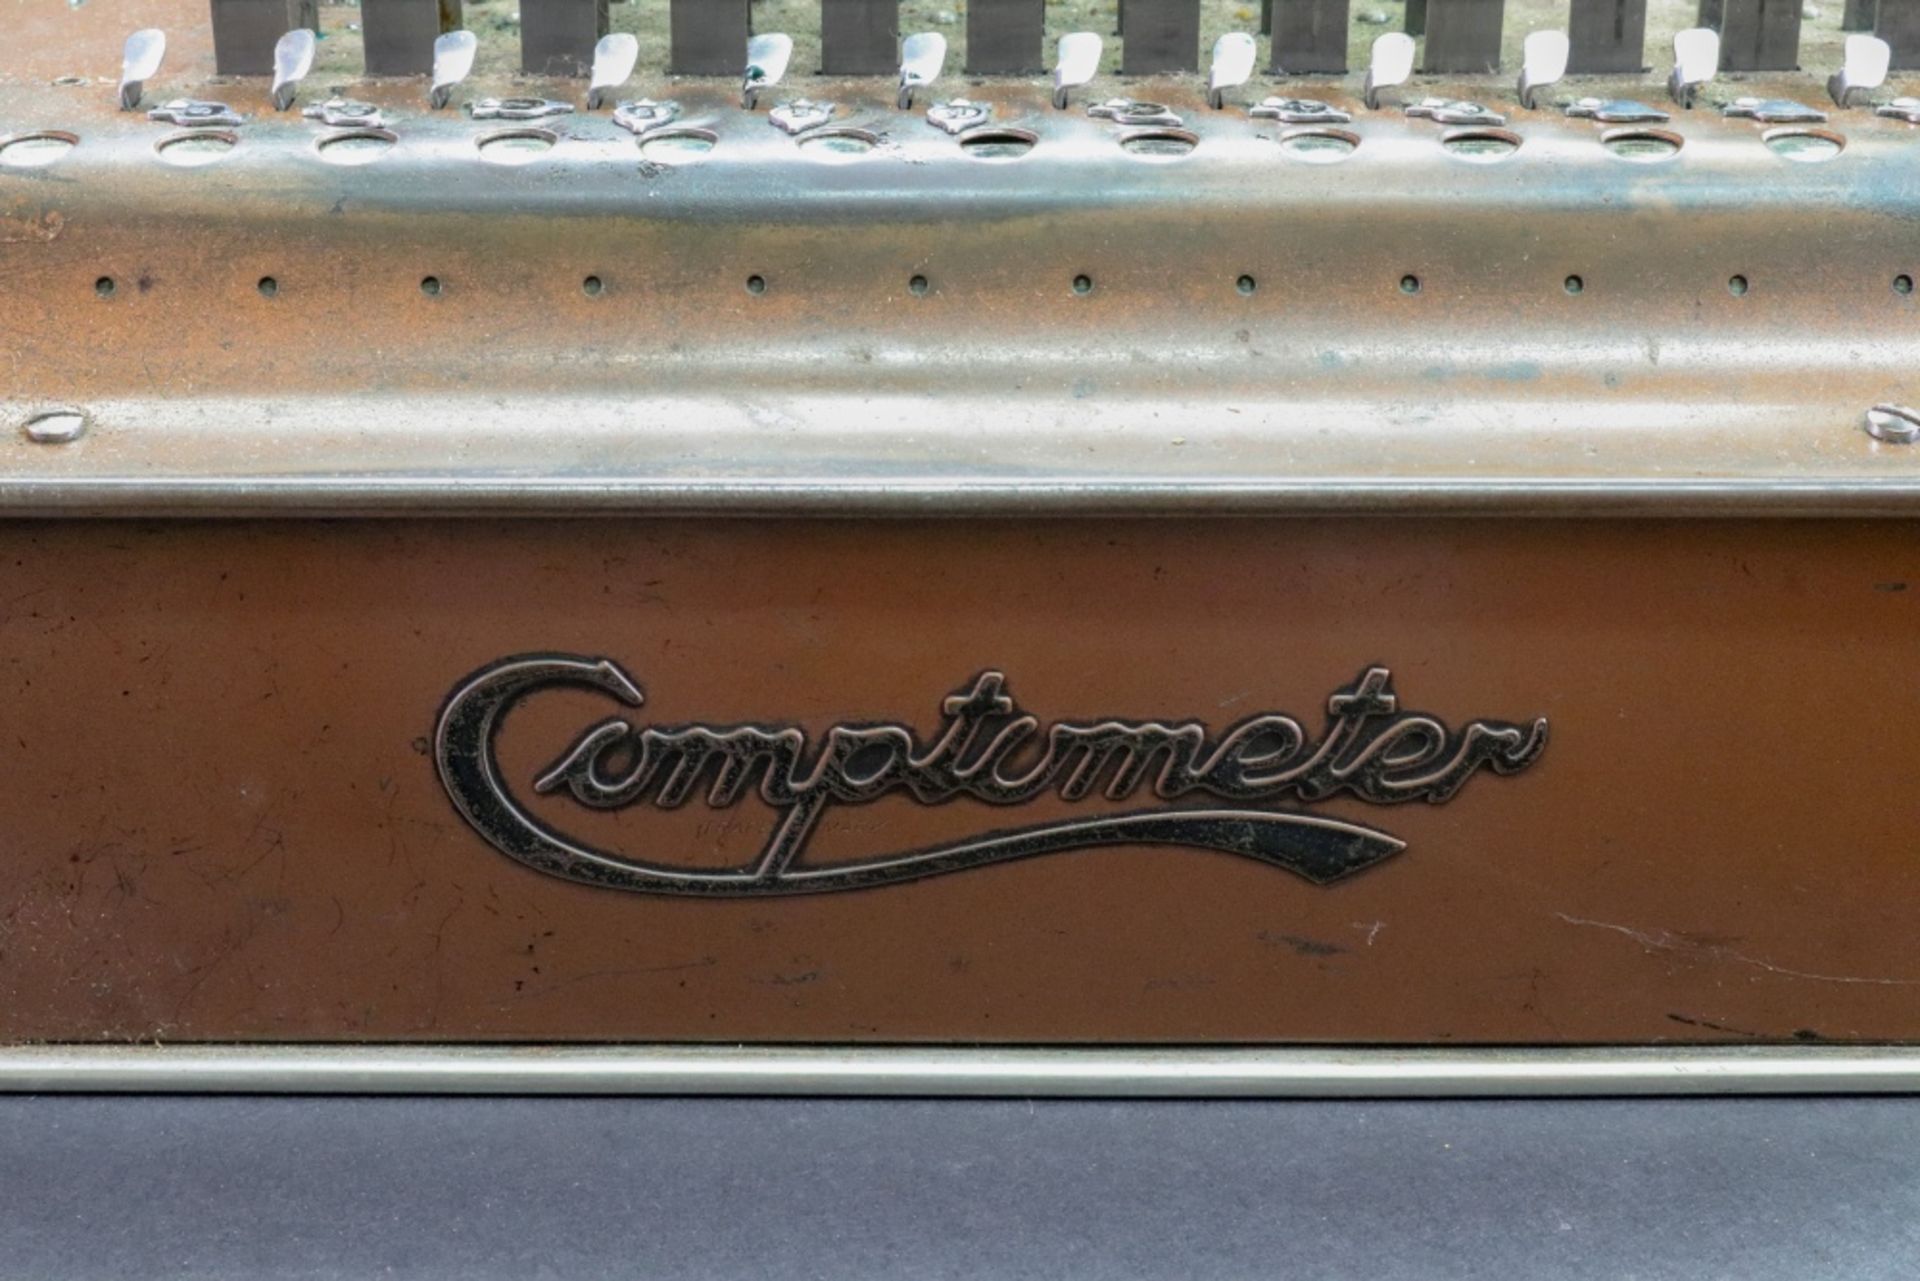 Felt and Tarrant Manufacturing Co; Comptometer, no. - Image 3 of 3